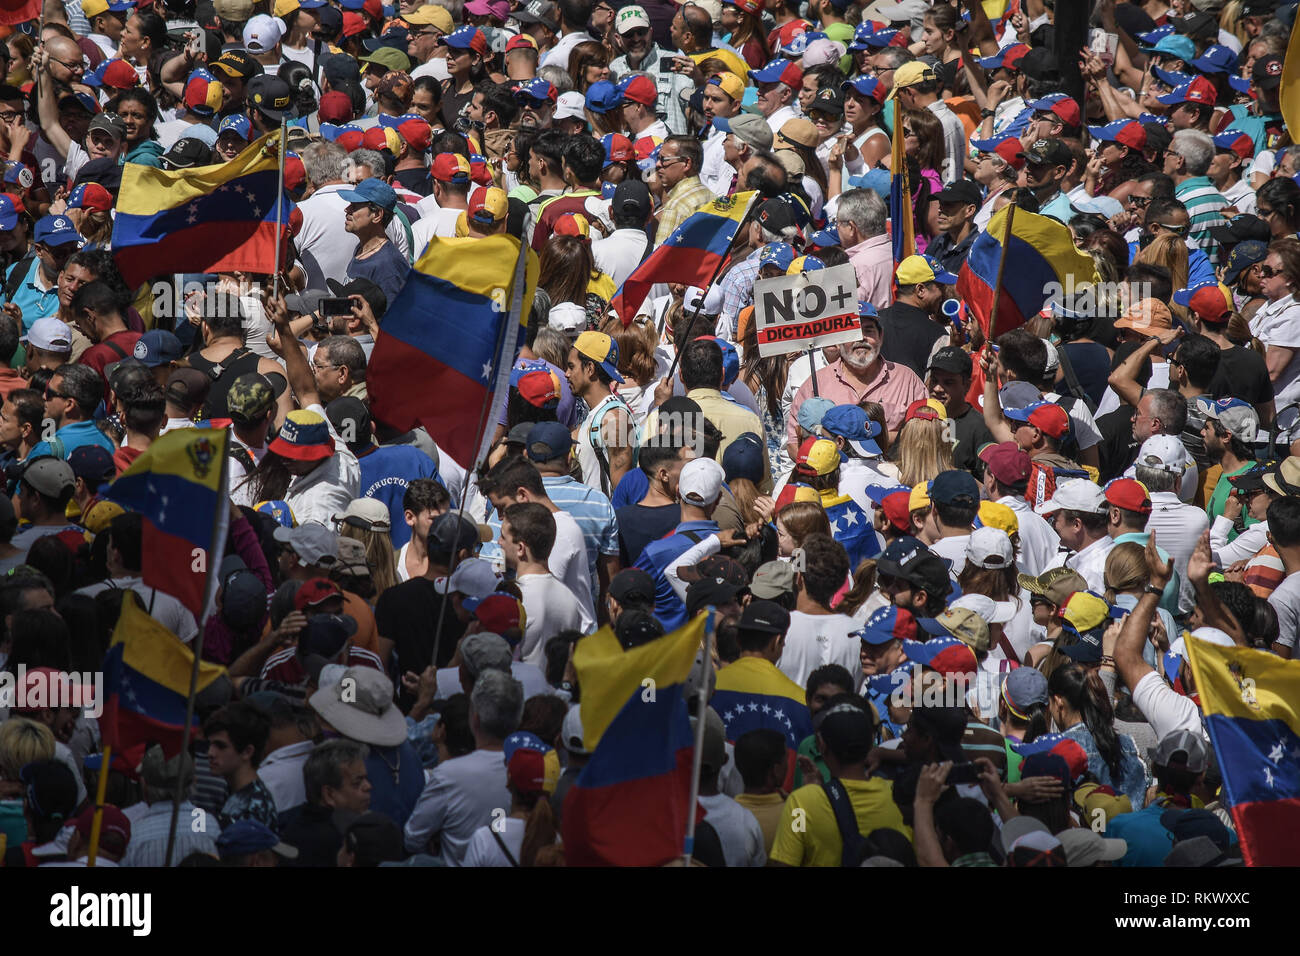 A view of the crowd during a protest to call for a change in the government. Opponents gather at a protest organised by the PSUV (United Socialist Party of Venezuela) after the call from interim president Juan Guaido, to show their support to him, while asking the army to allow more humanitarian aids into the country. Stock Photo